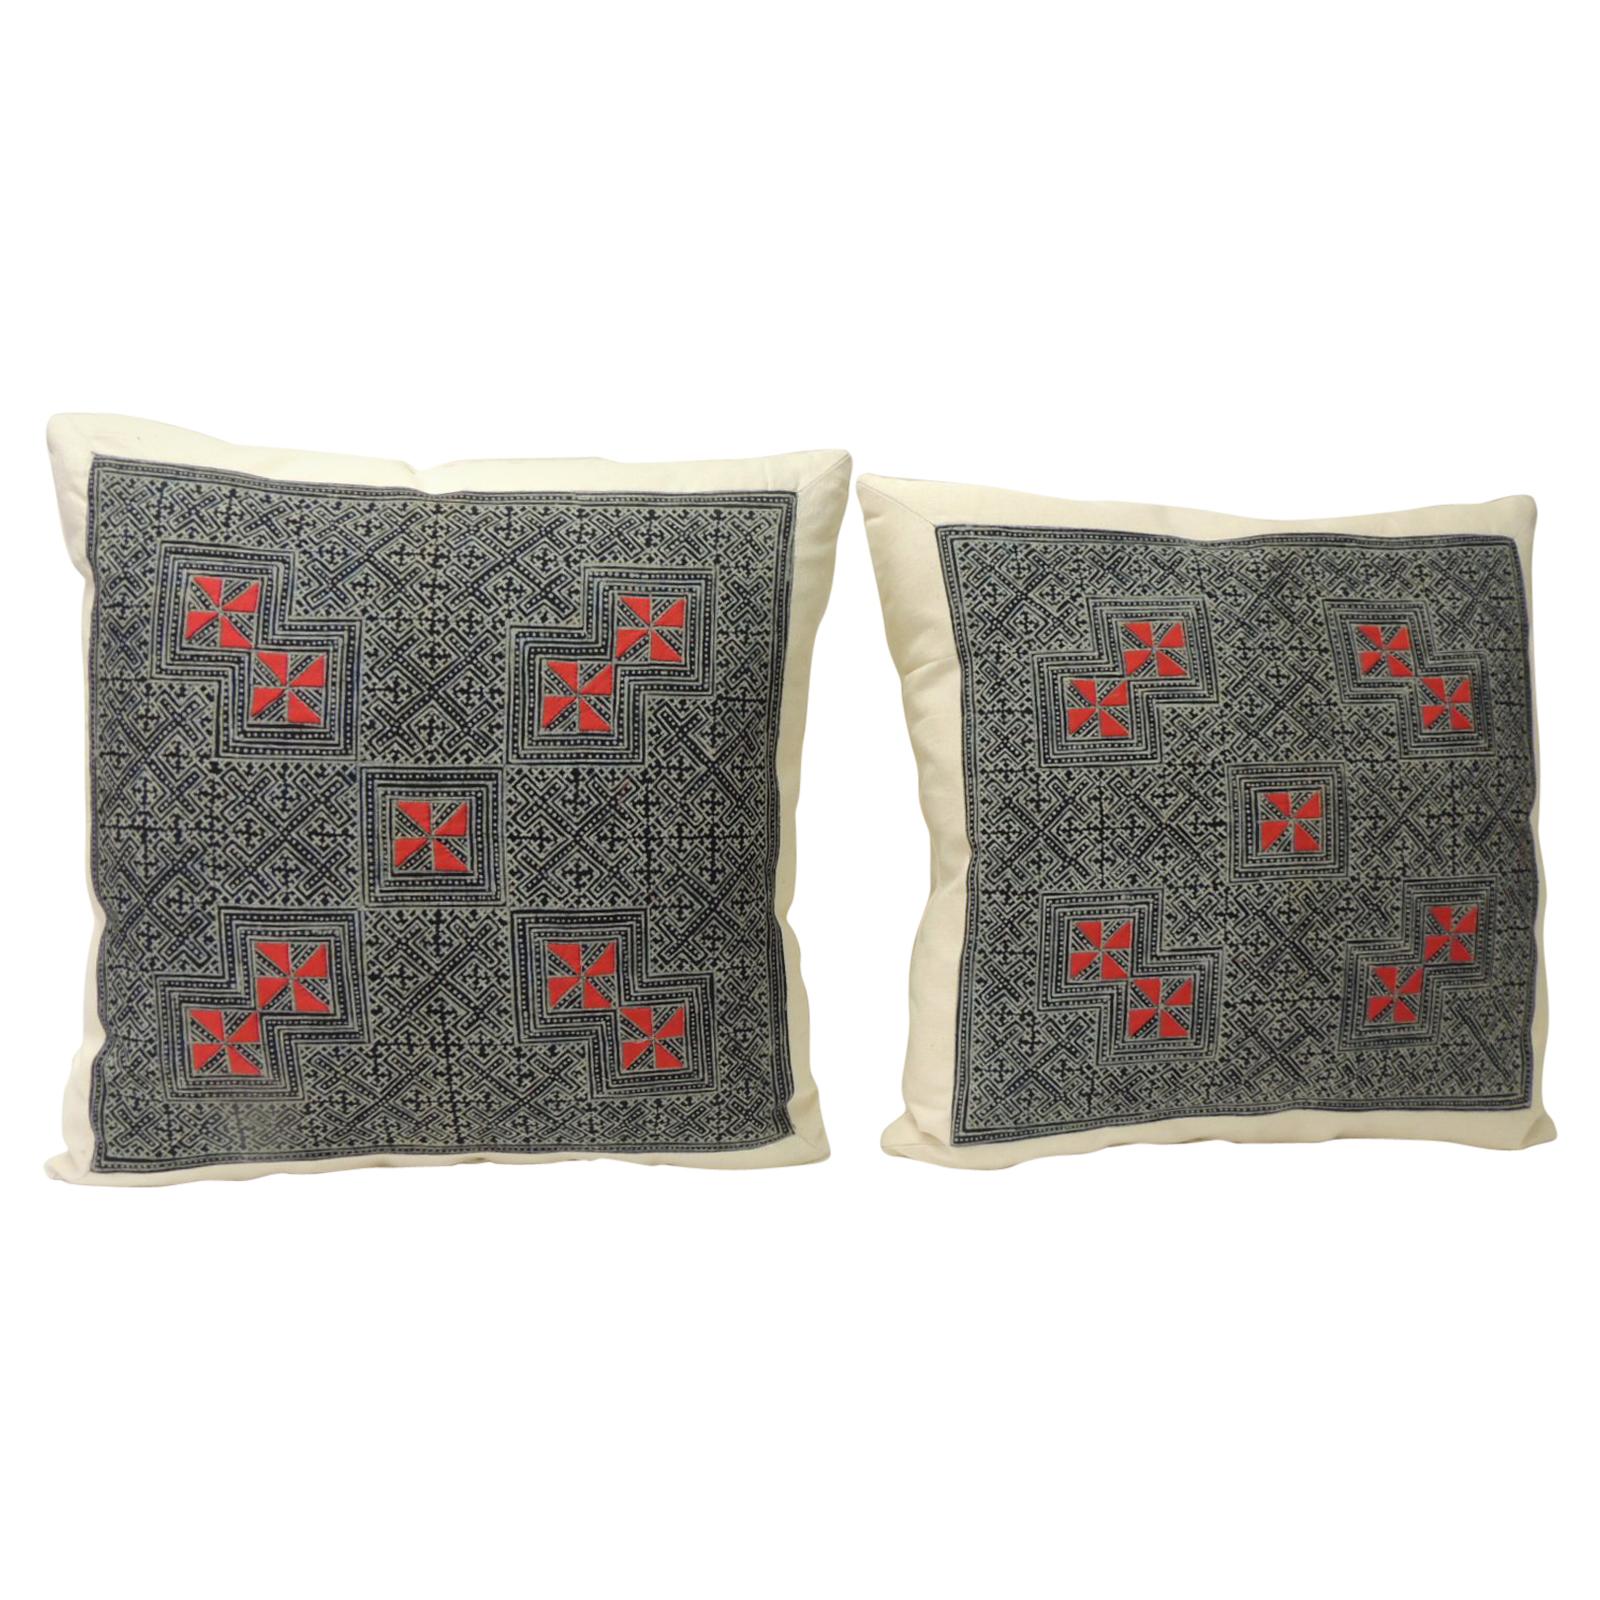 Pair of Vintage Embroidered Red and Indigo Batik  Square Decorative Pillows